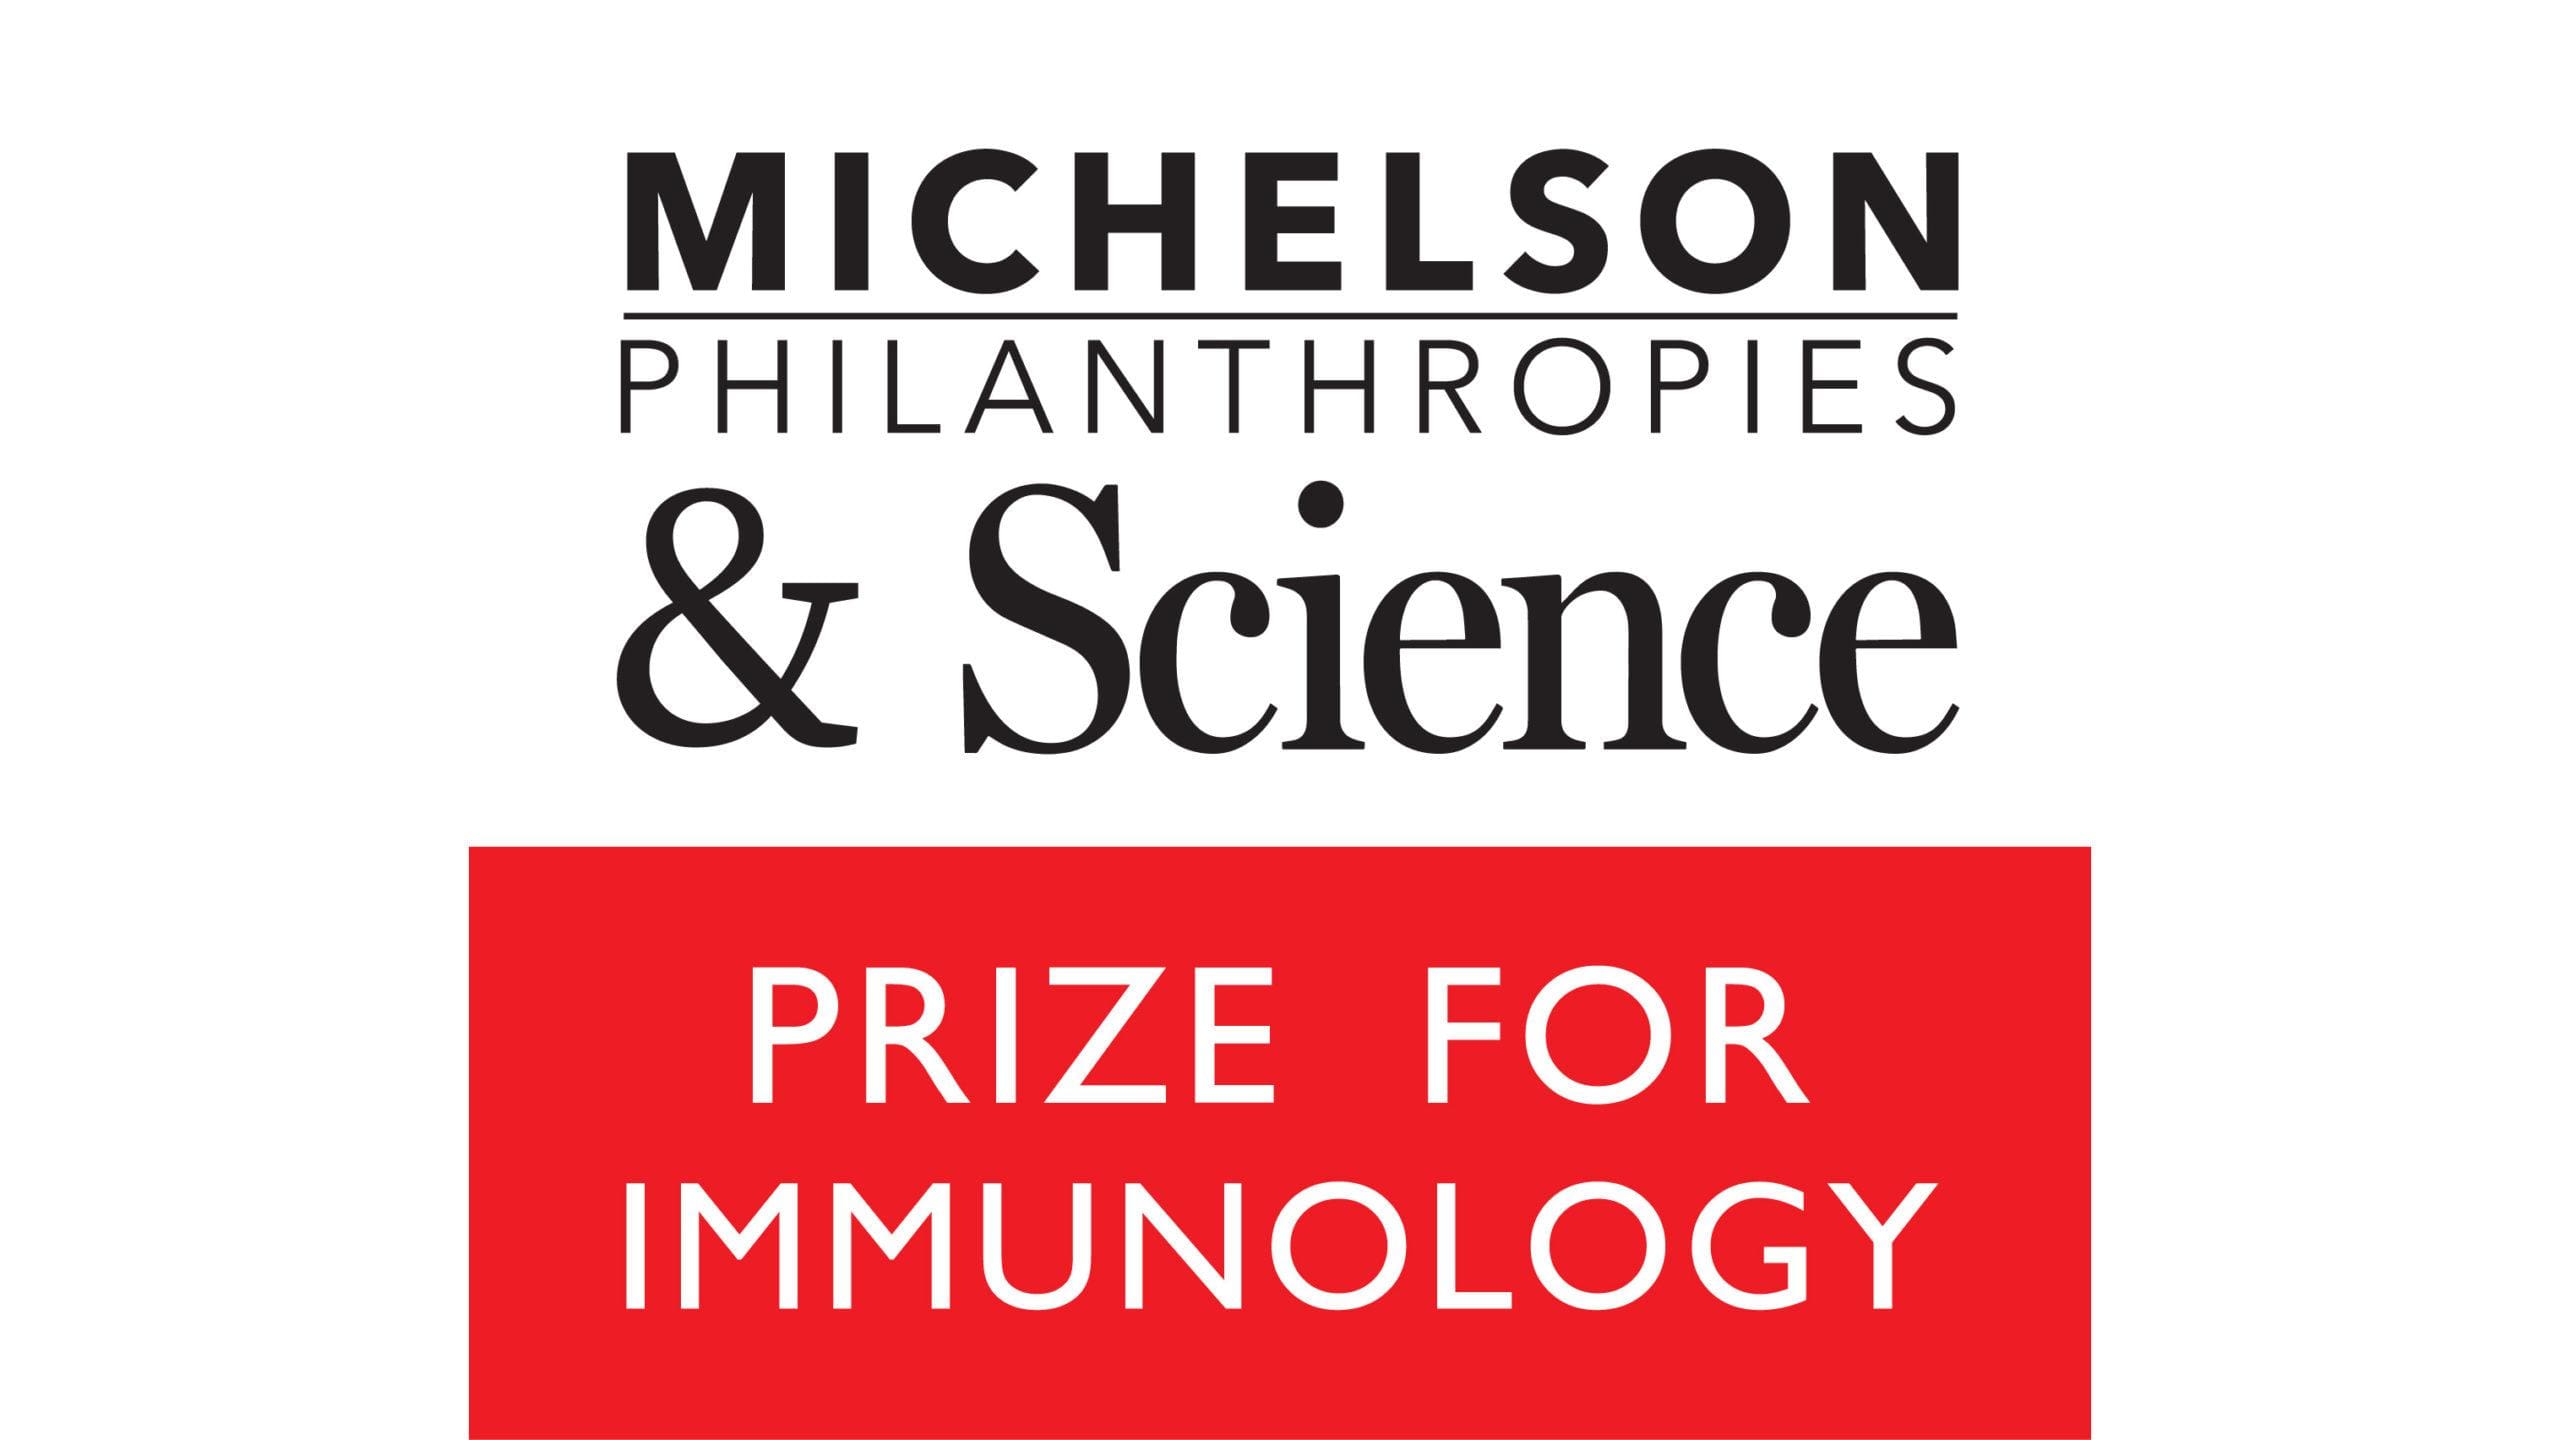 Michelson Philanthropies & Science Prize for Immunology